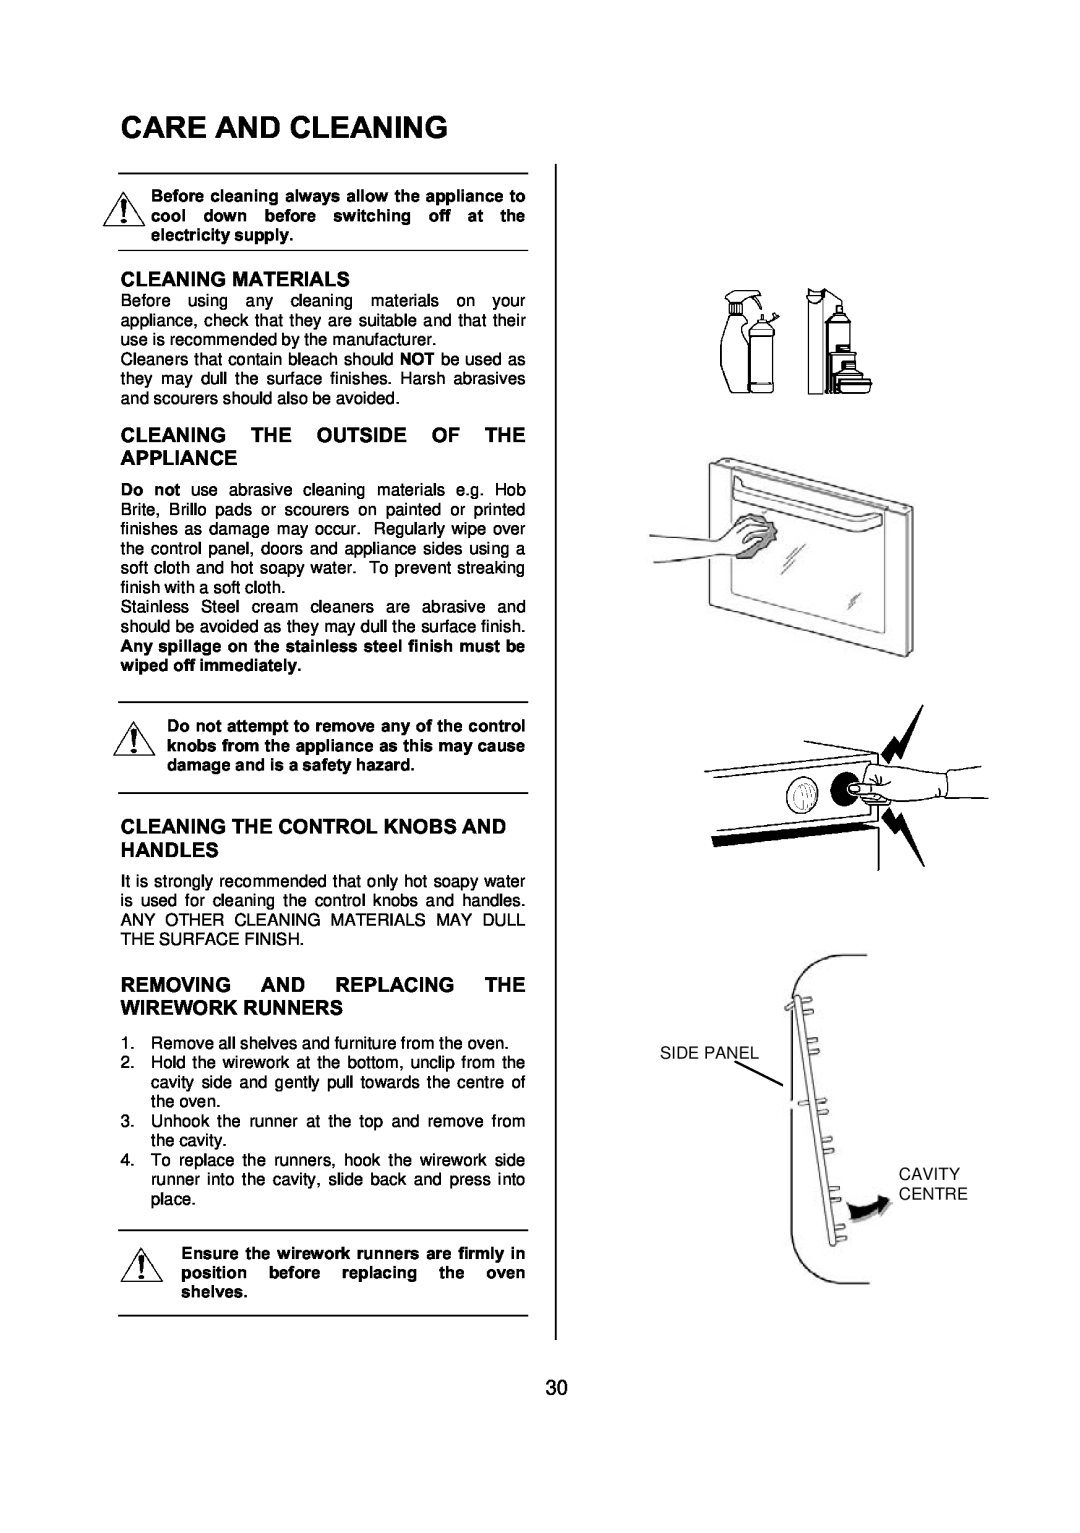 Electrolux D77000 user manual Care And Cleaning, Cleaning Materials, Cleaning The Outside Of The Appliance 